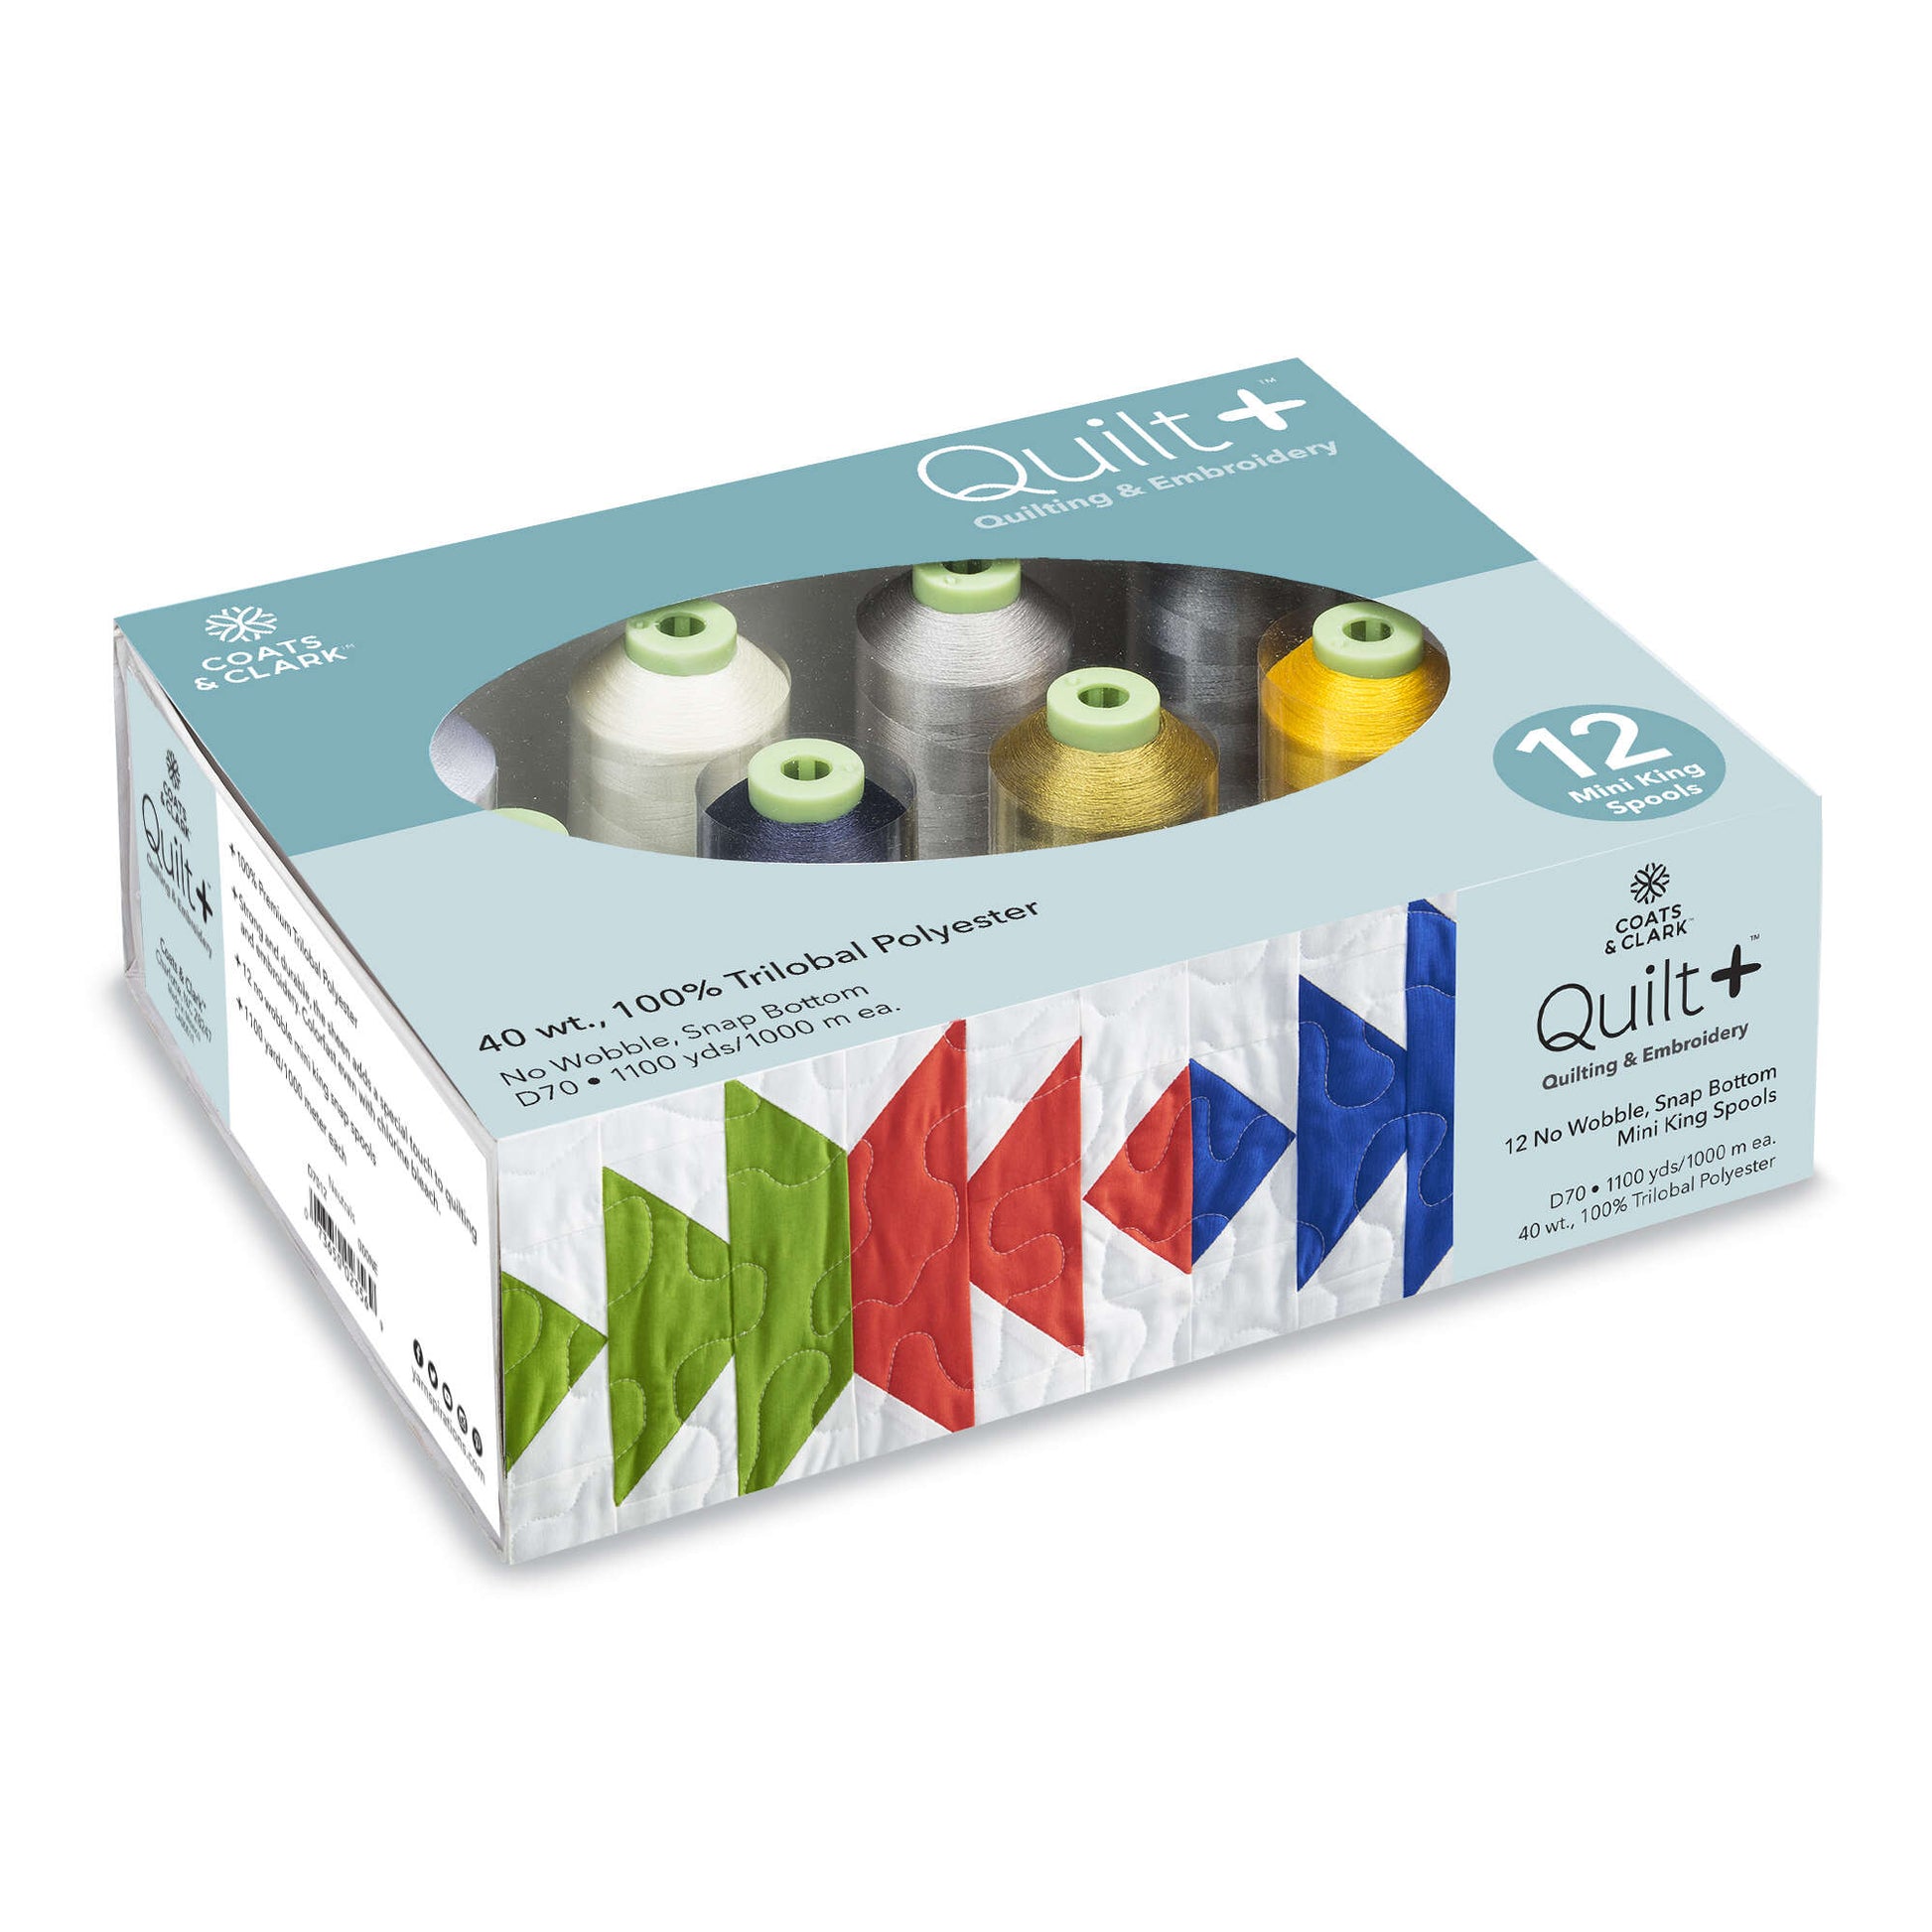 Coats & Clark Quilt + Quilting & Embroidery Thread 12 Spool Set  - Clearance items